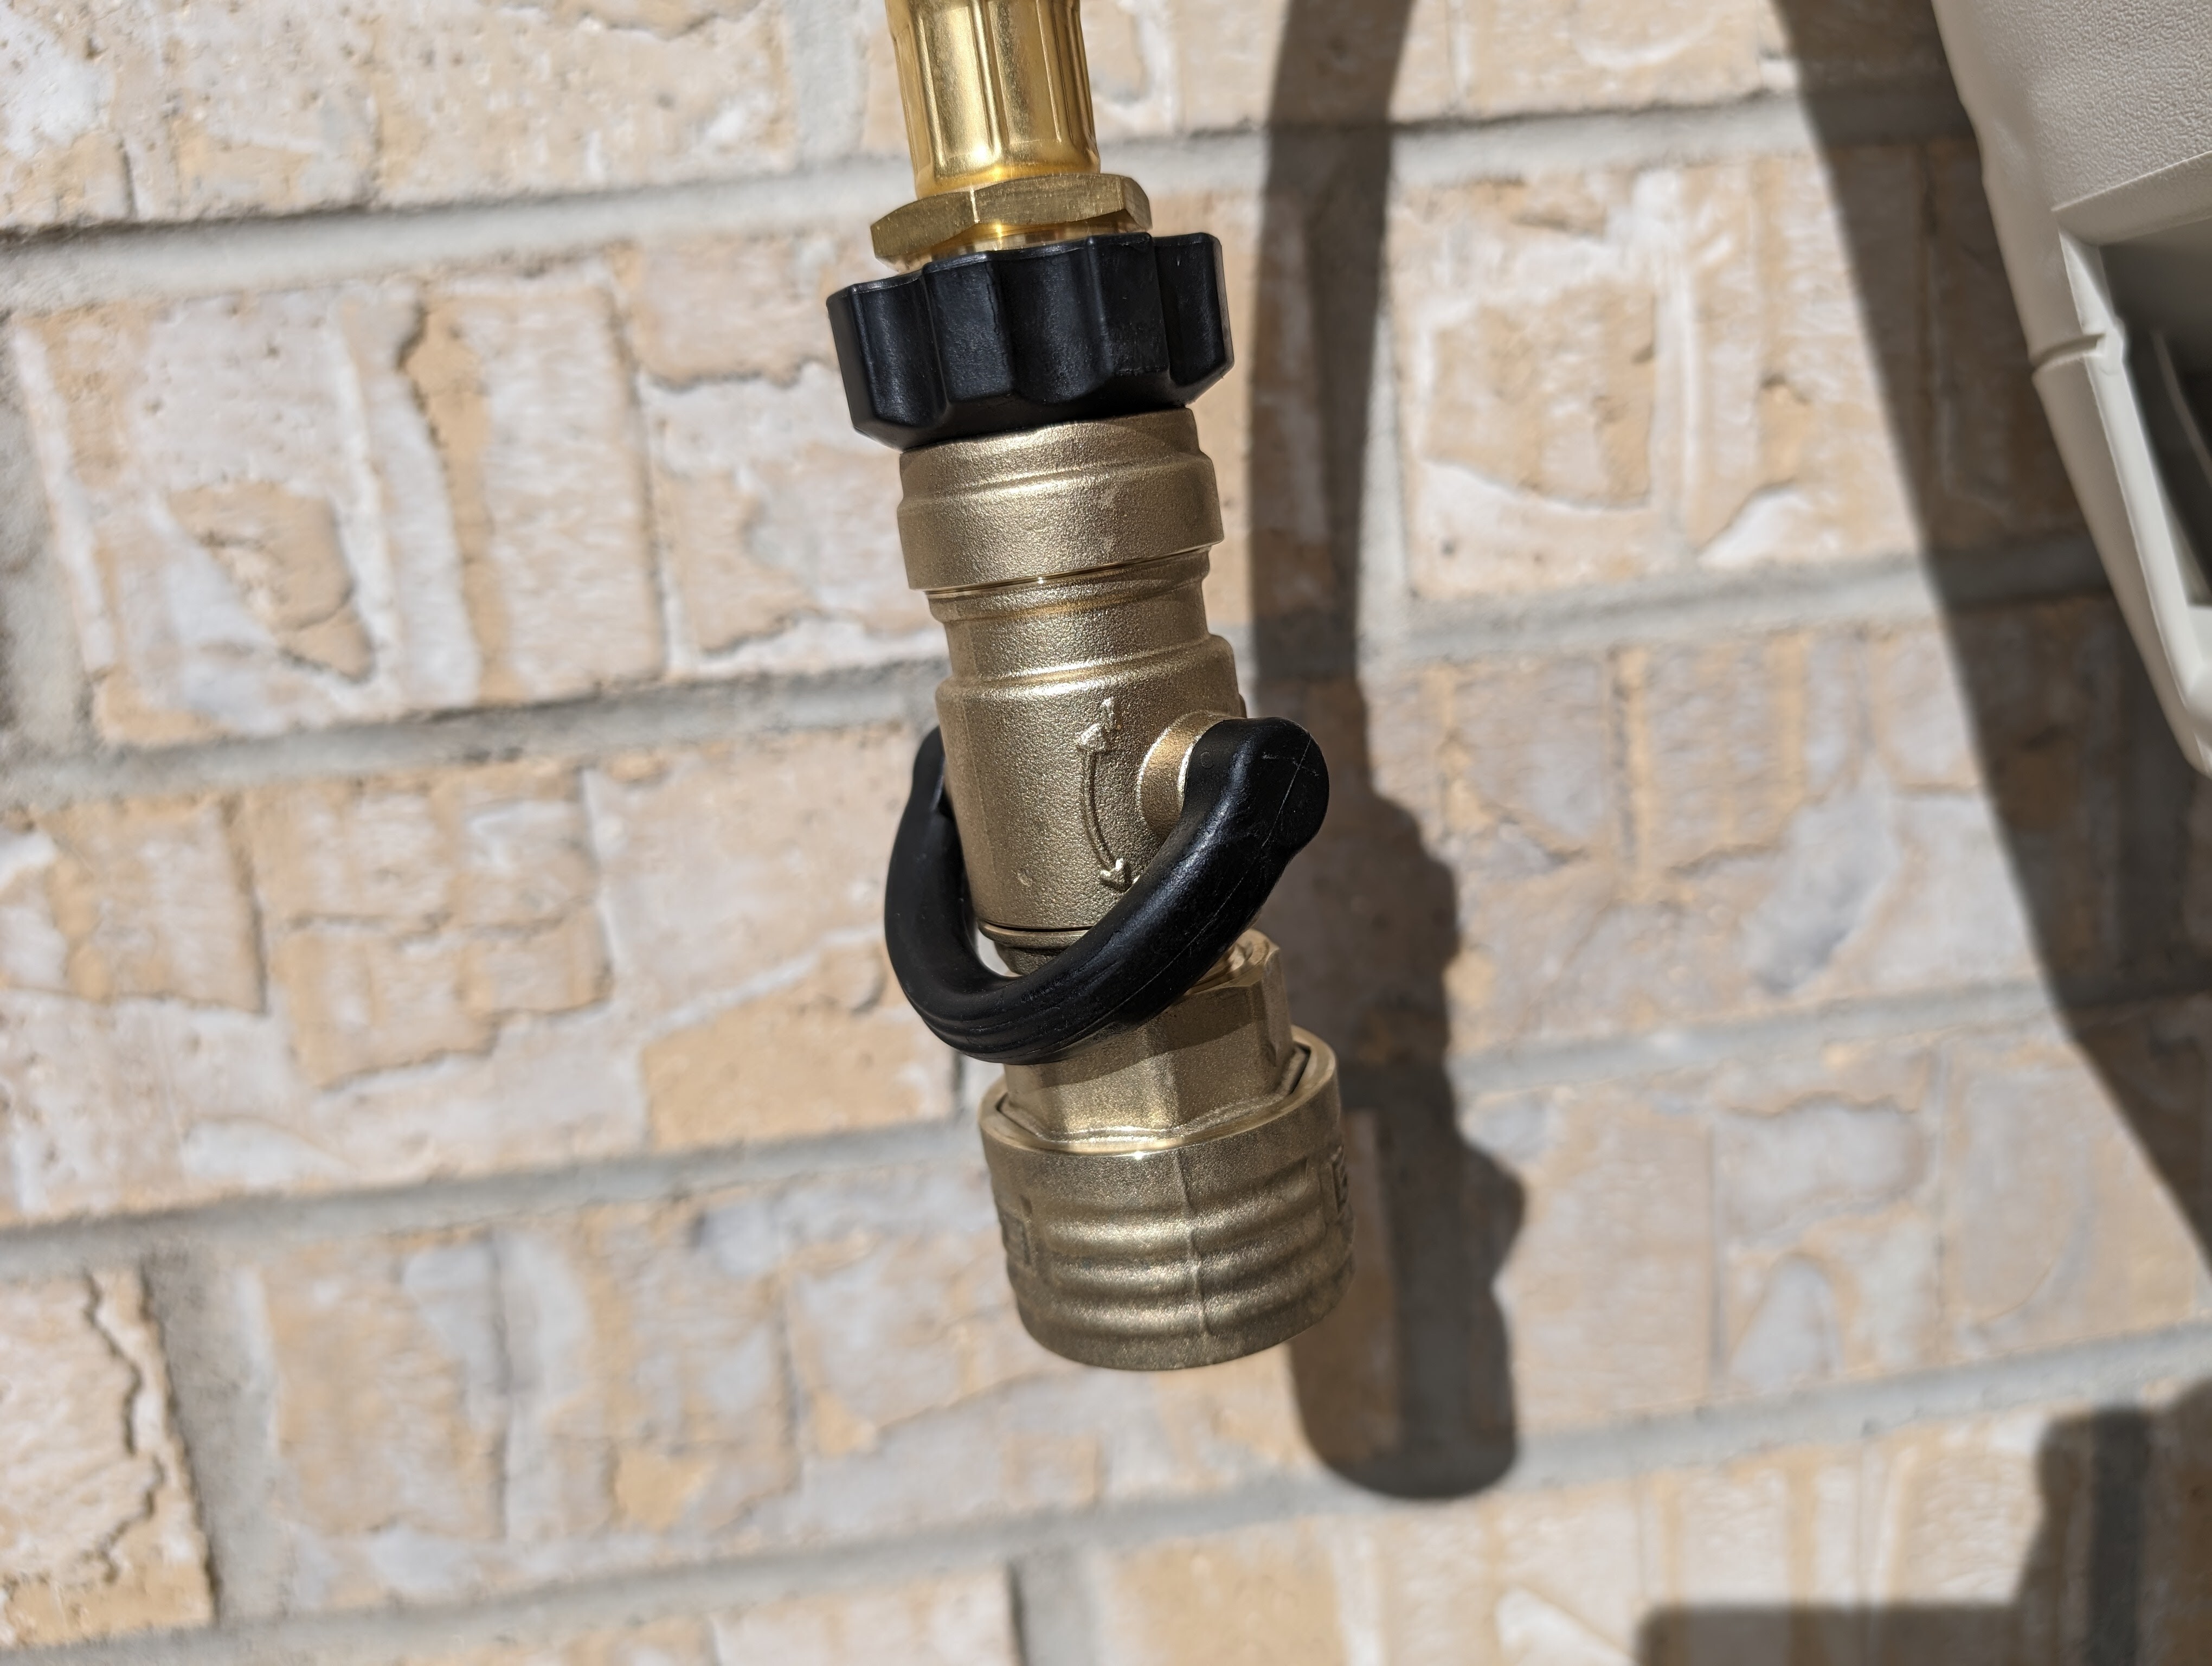 Eley swivel and quick disconnect